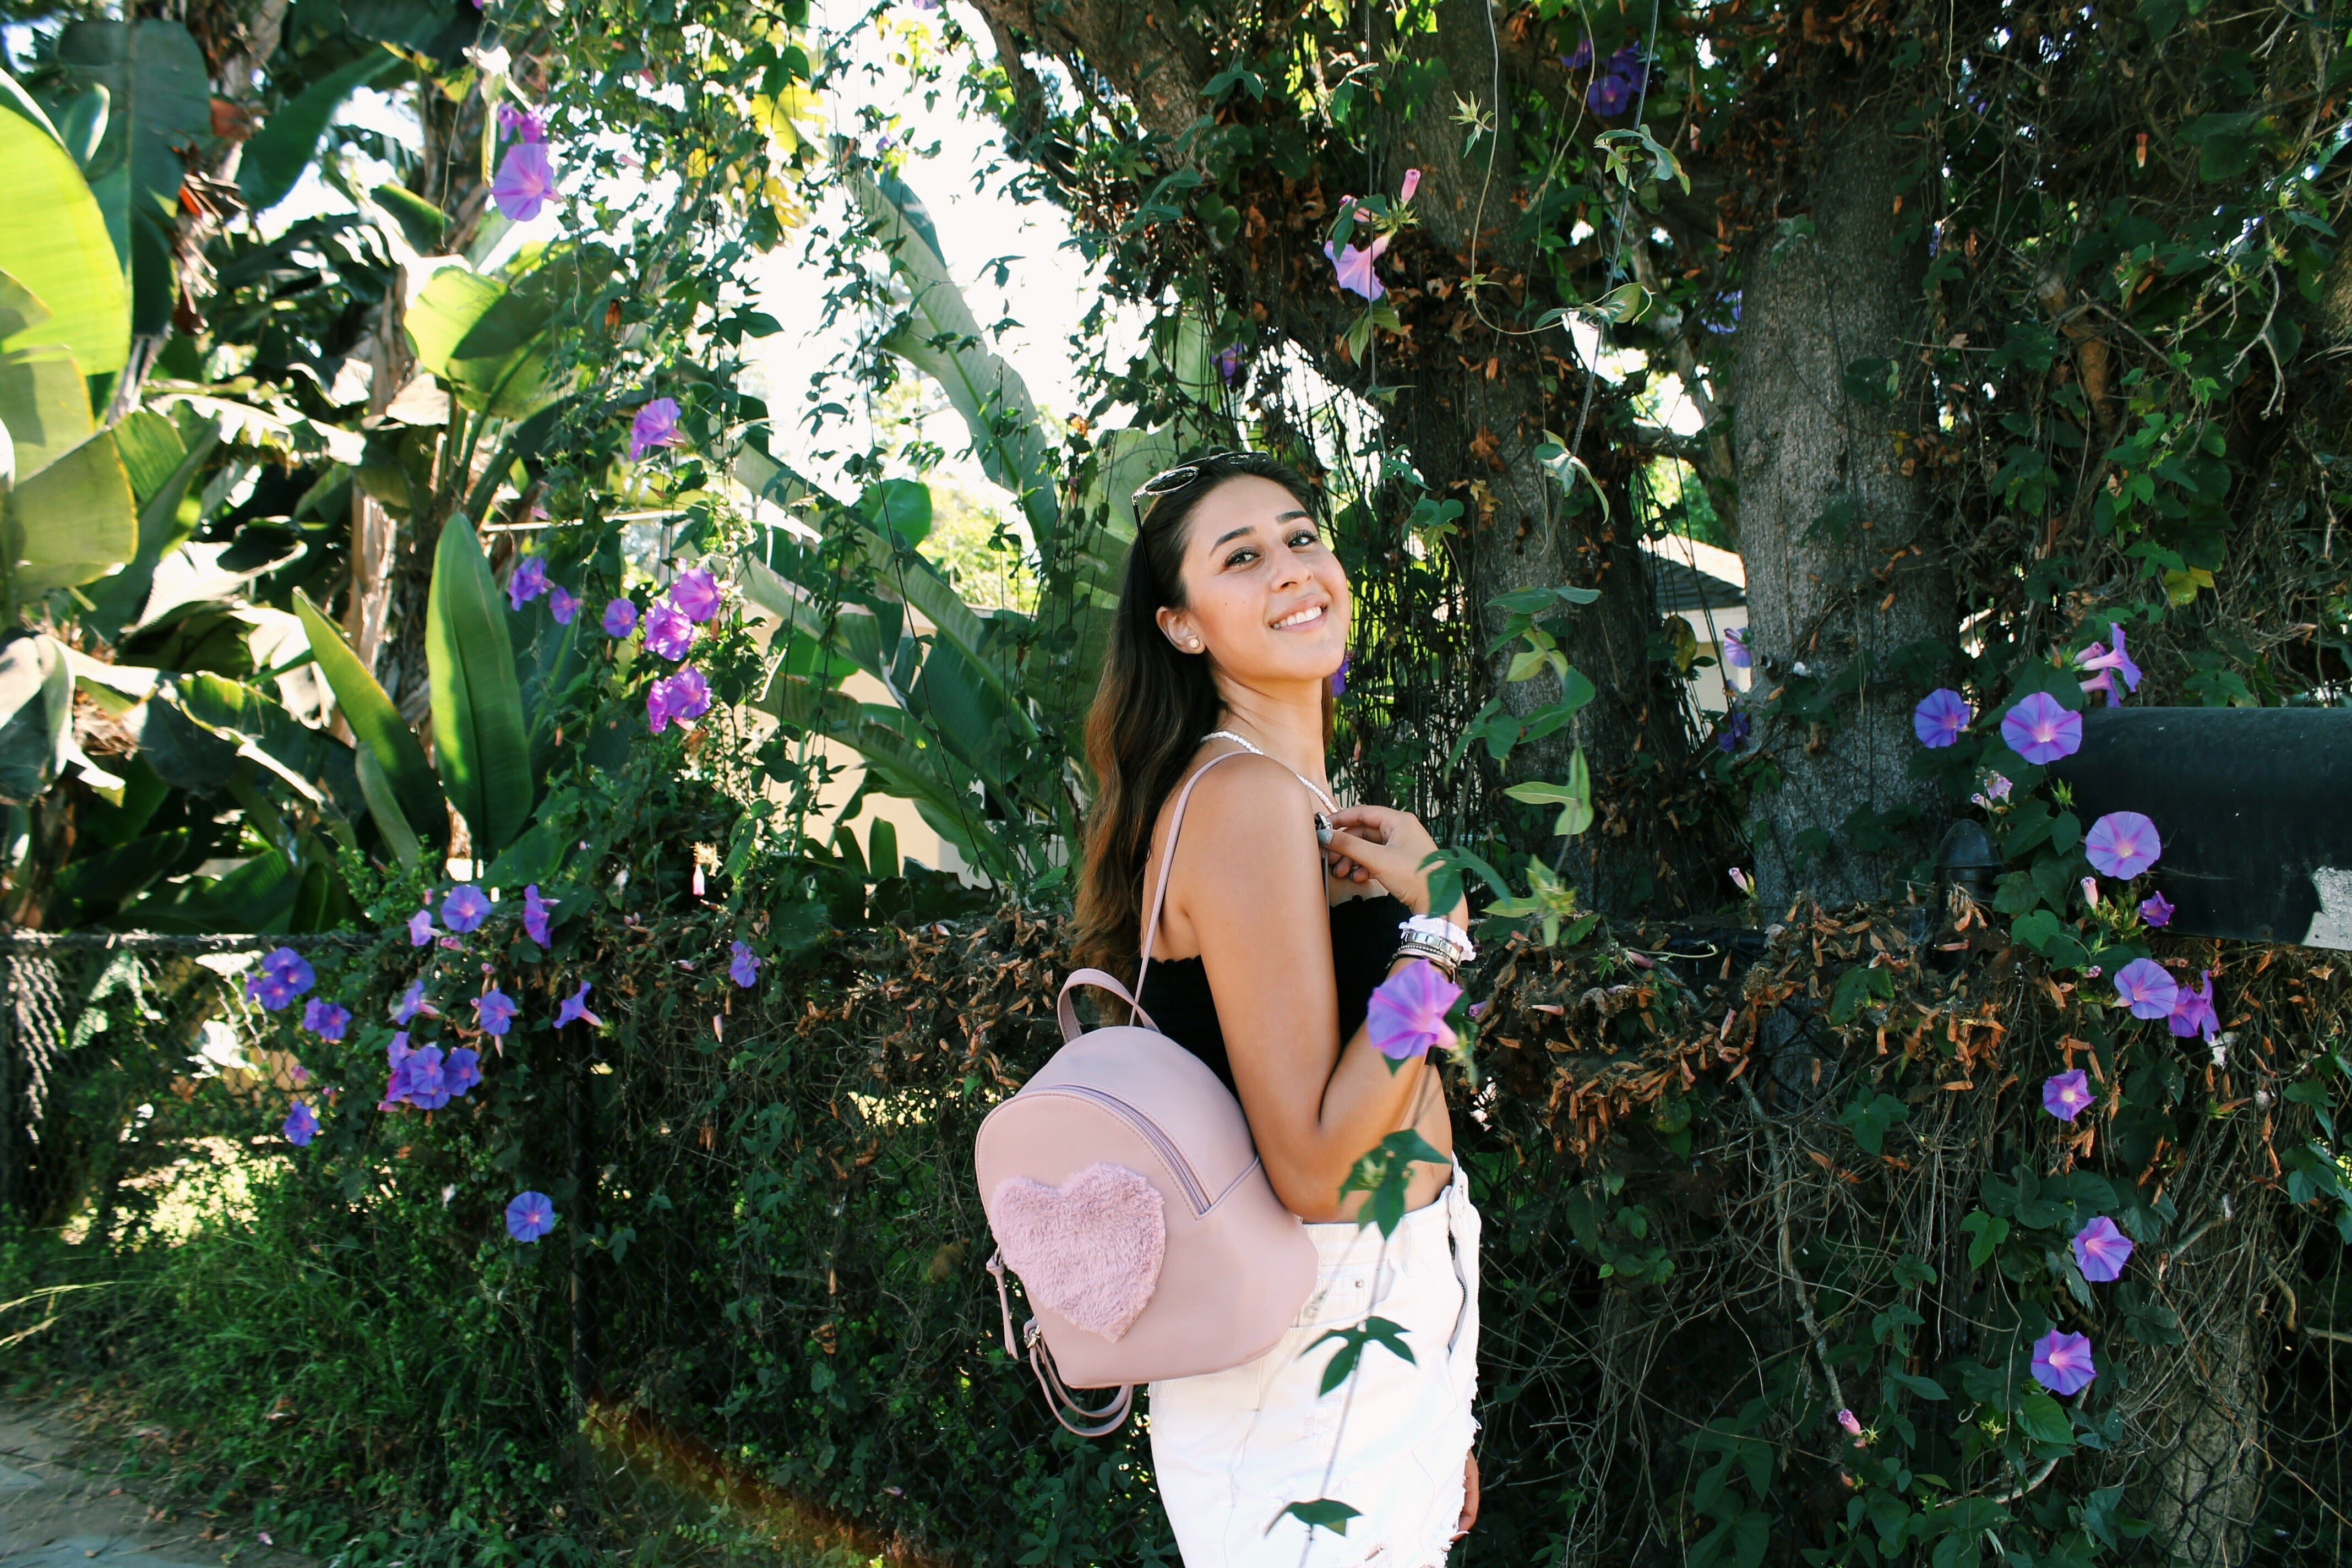 Love Furever Backpack in Lilac